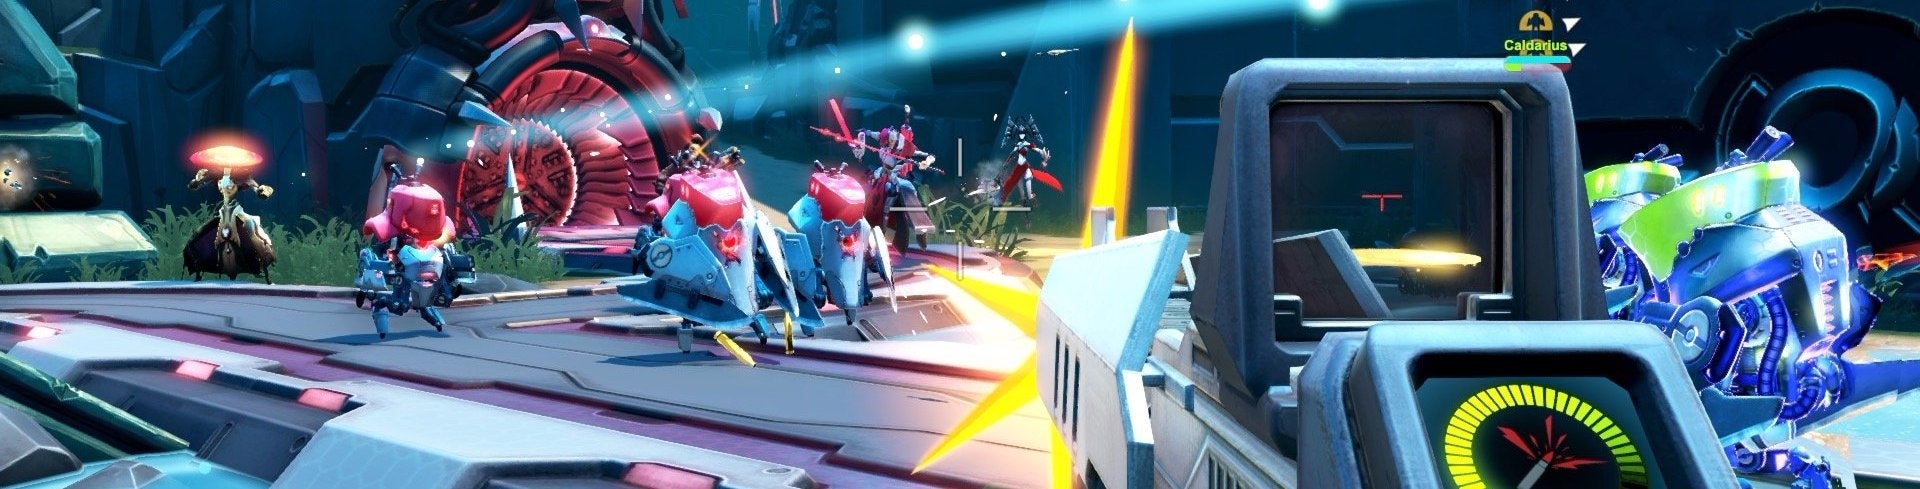 Image for Performance Analysis: Battleborn beta on PS4 and Xbox One